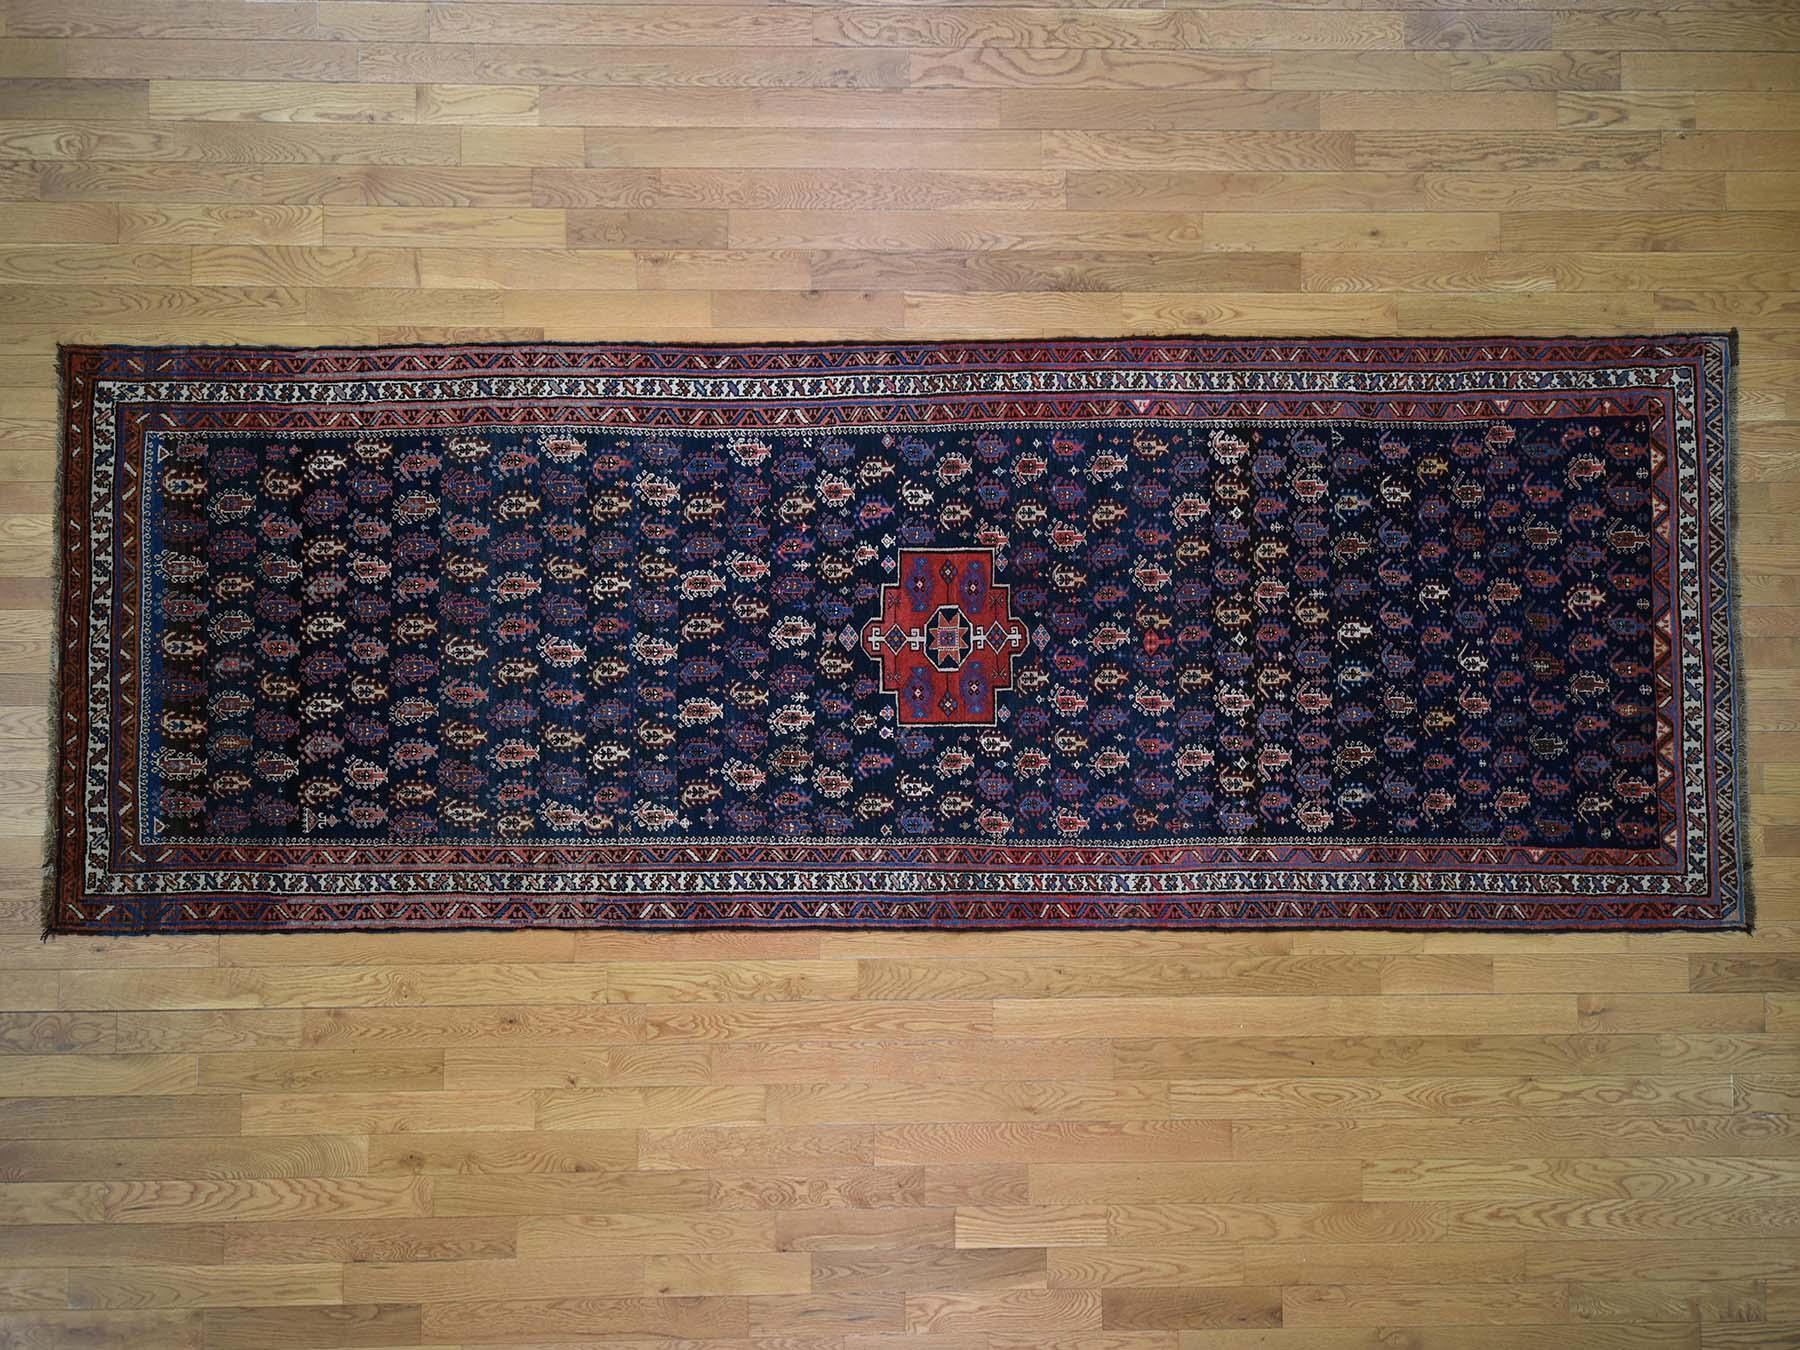 This is a genuine hand knotted oriental rug. It is not hand tufted or machine made rug. our entire inventory is made of either hand knotted or handwoven rugs.

Bring life to your home with this lovely hand knotted carpet. This handcrafted antique is